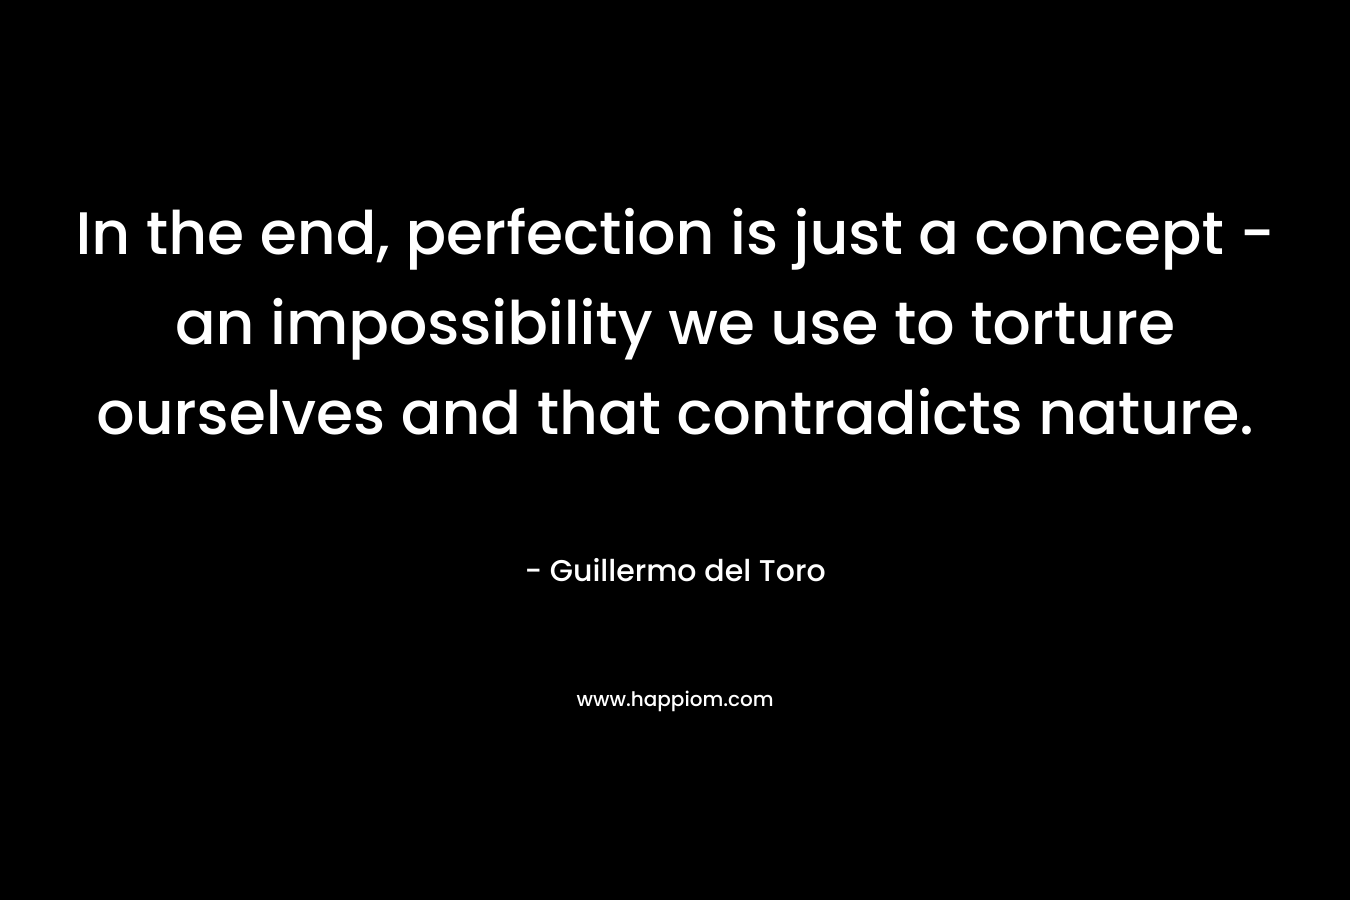 In the end, perfection is just a concept – an impossibility we use to torture ourselves and that contradicts nature. – Guillermo del Toro